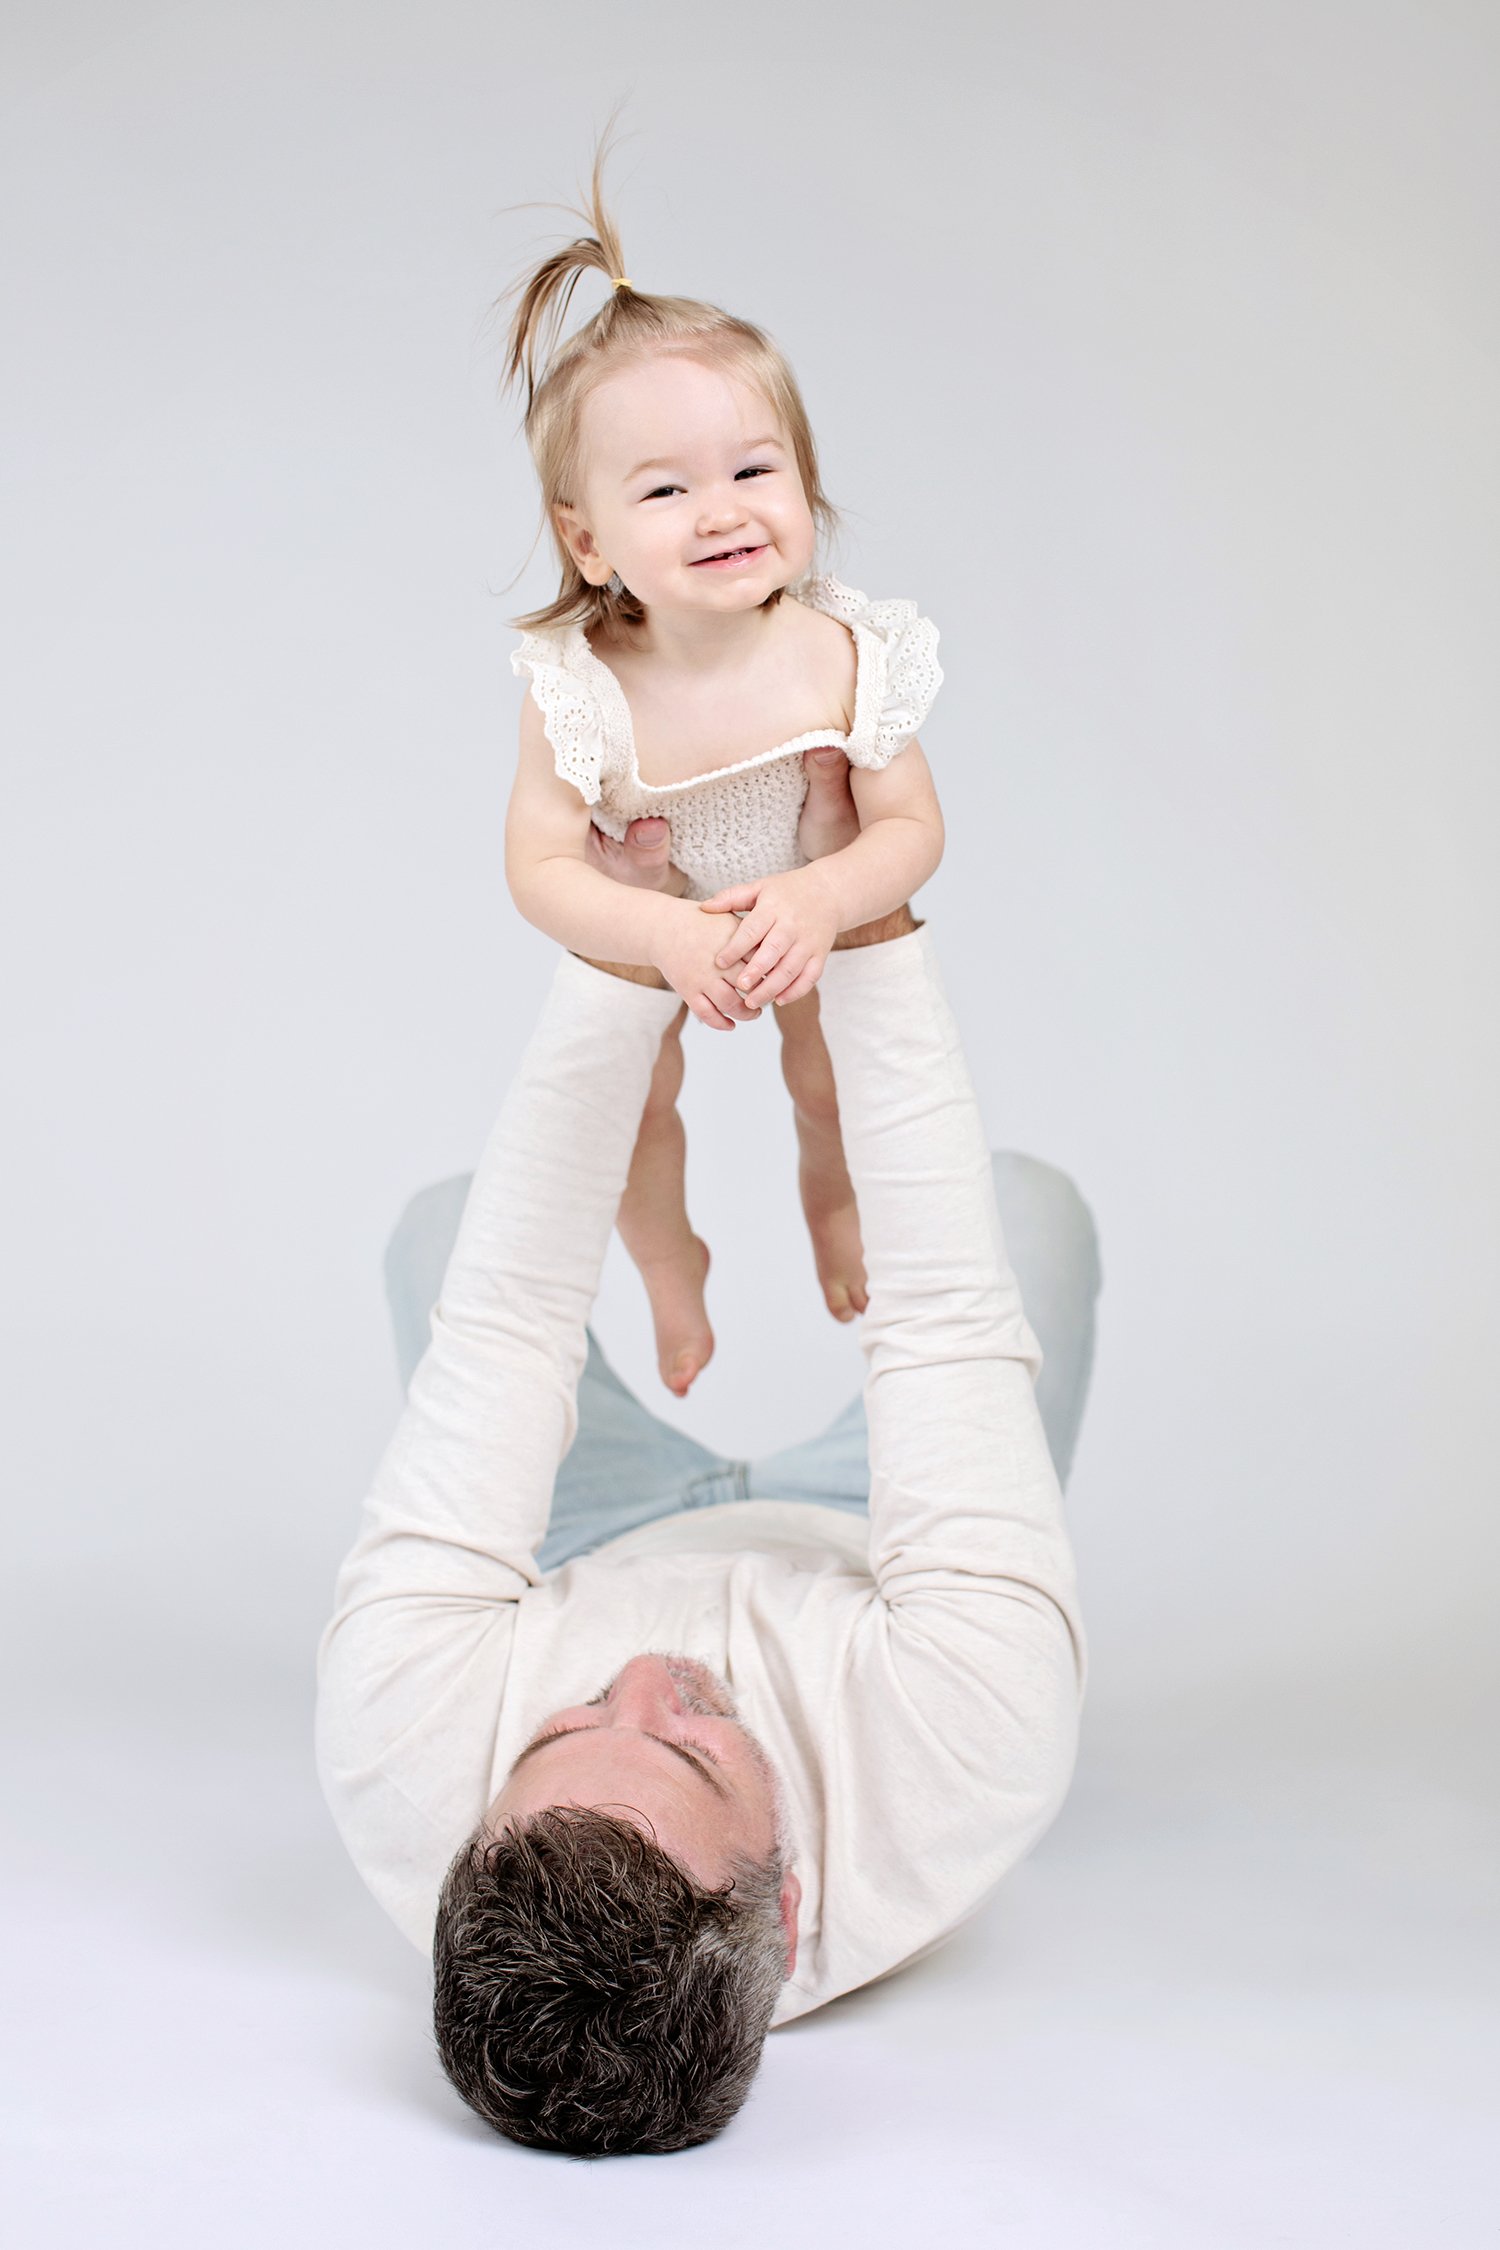 a baby smiling with her dad in a first year photoshoot